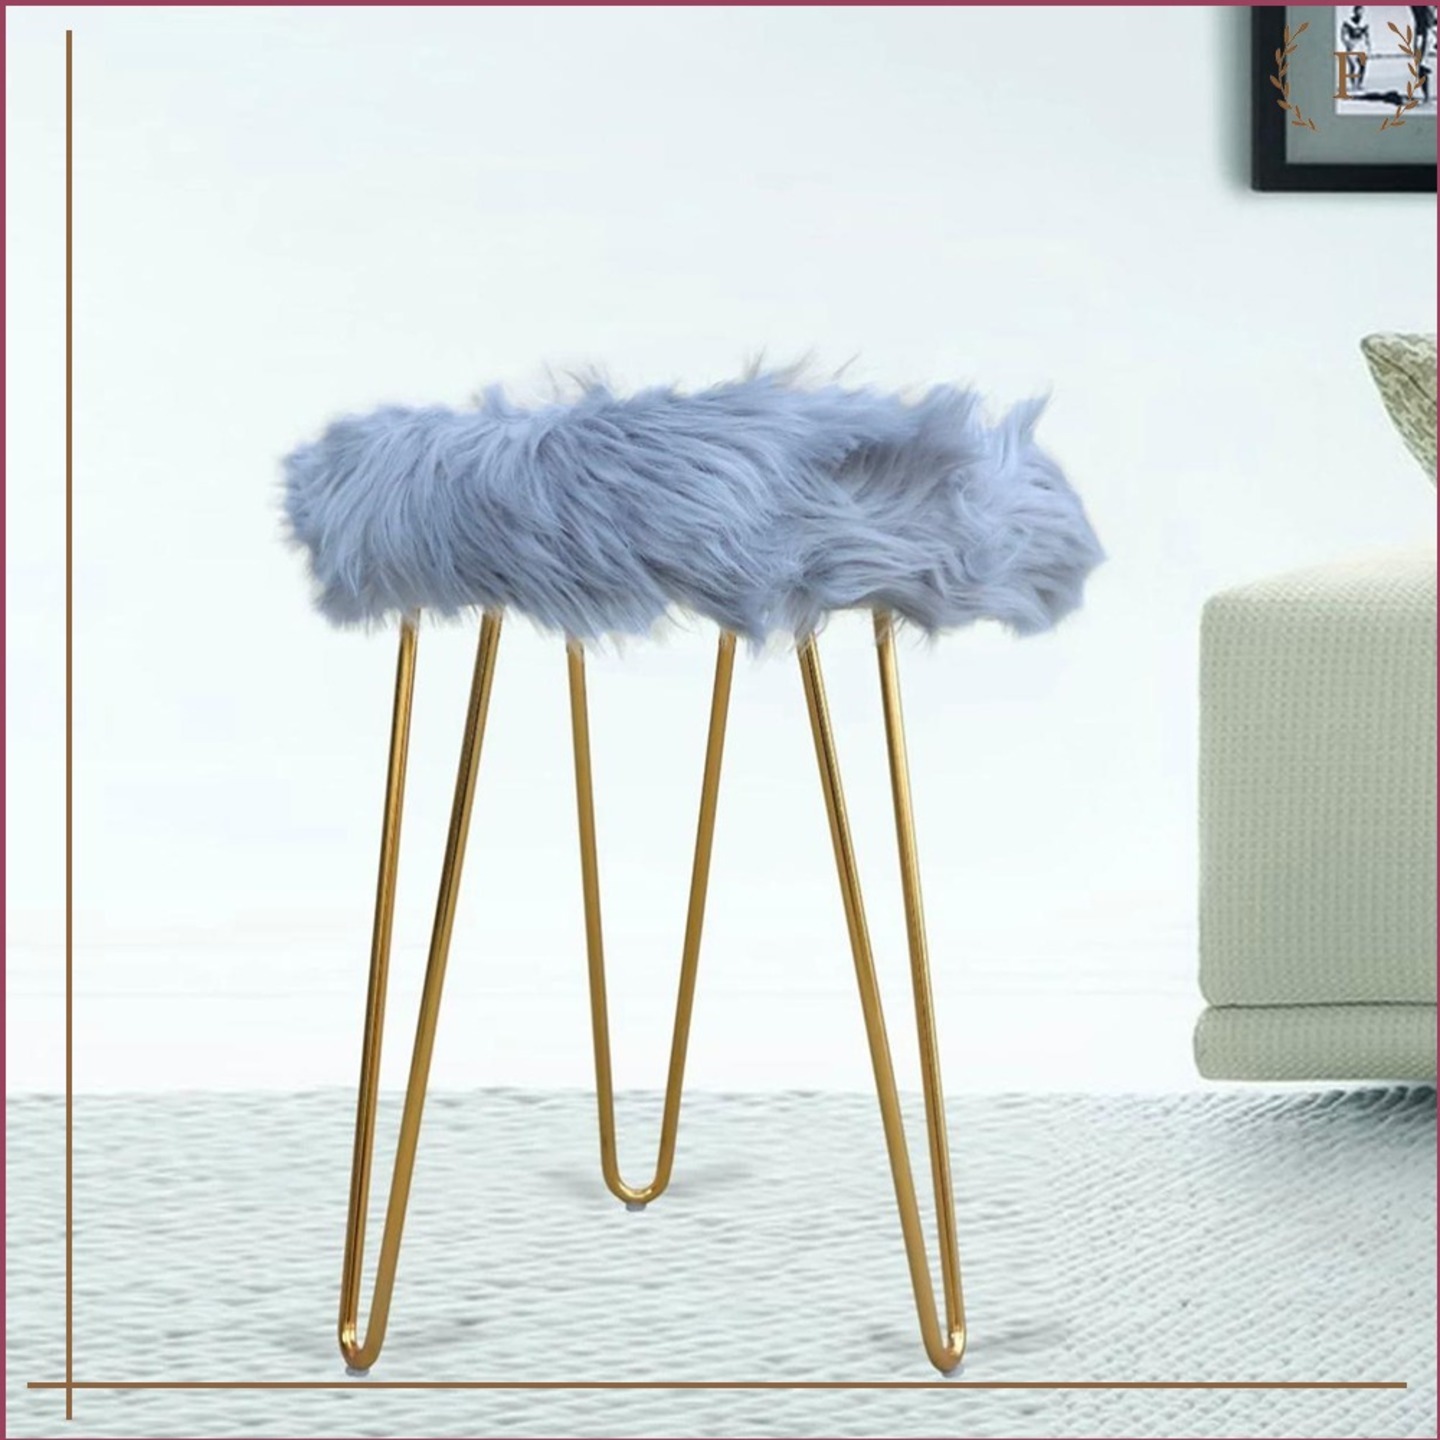 Faux Fur StoolsCast Iron Easy Portable Living Room Foot Rest Stools